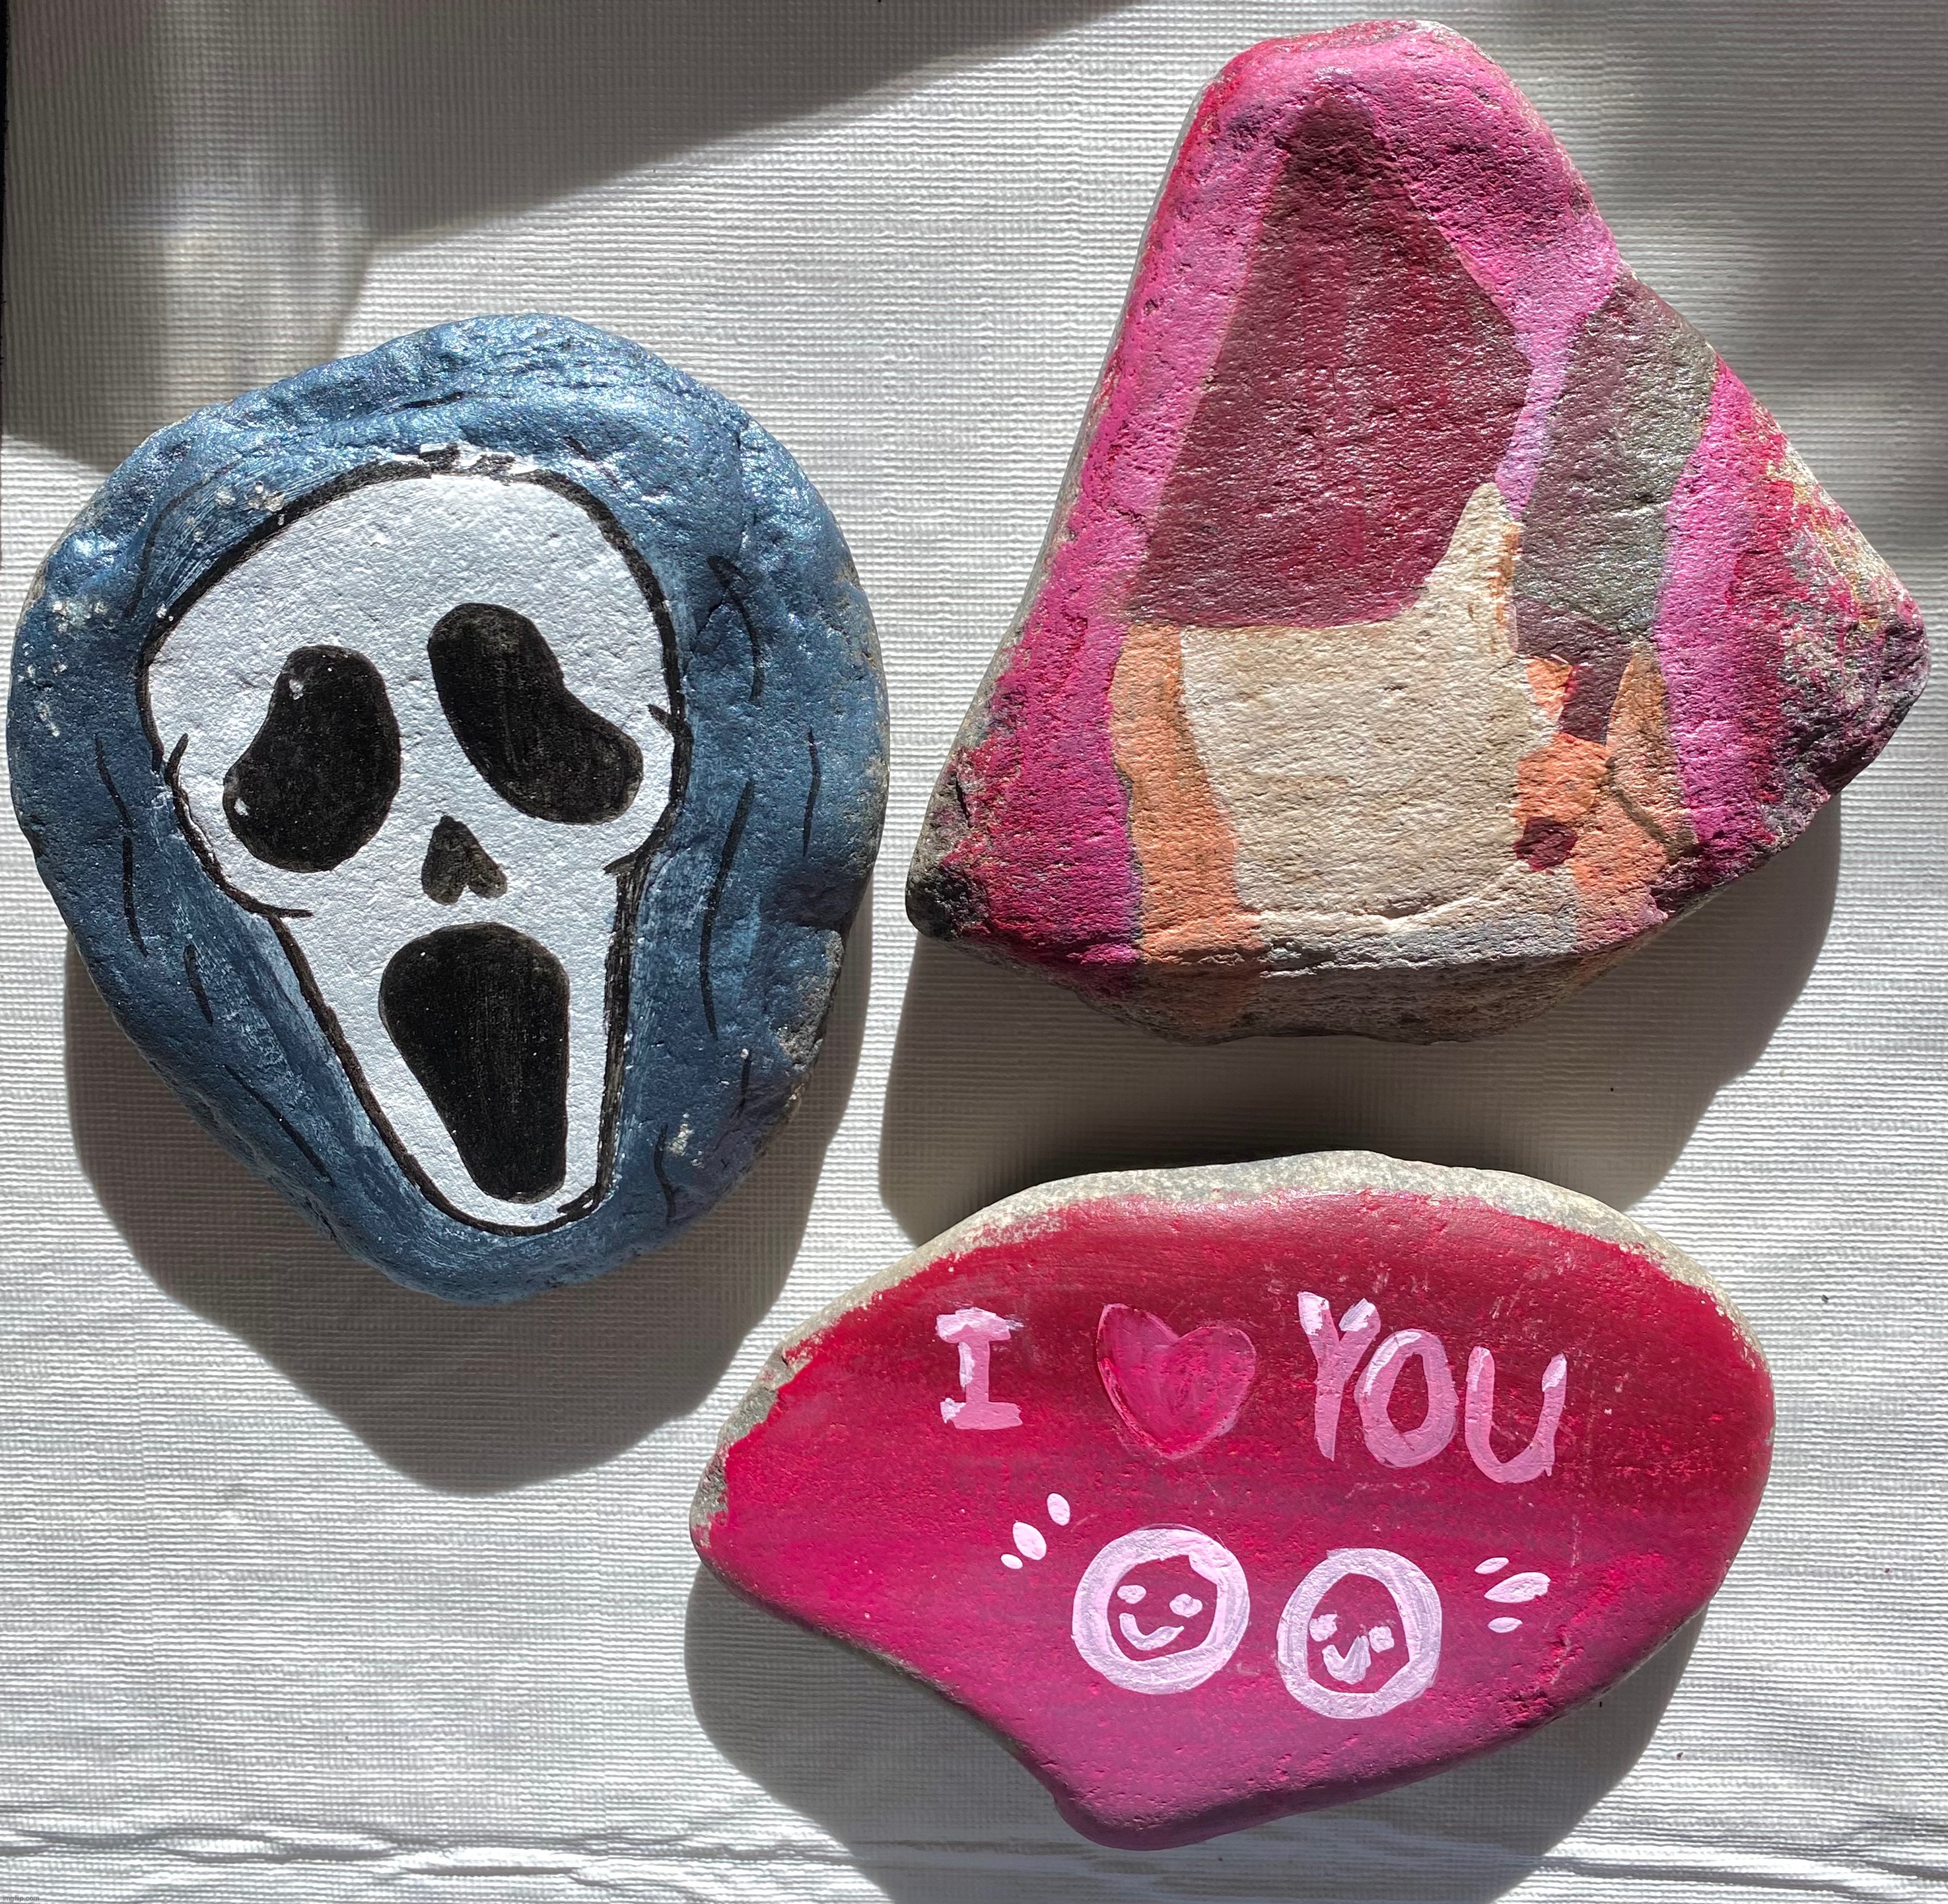 Cool rocks i painted today :darkuun_thumbs_up: | image tagged in technically a drawing,painting,rocks,yippie | made w/ Imgflip meme maker